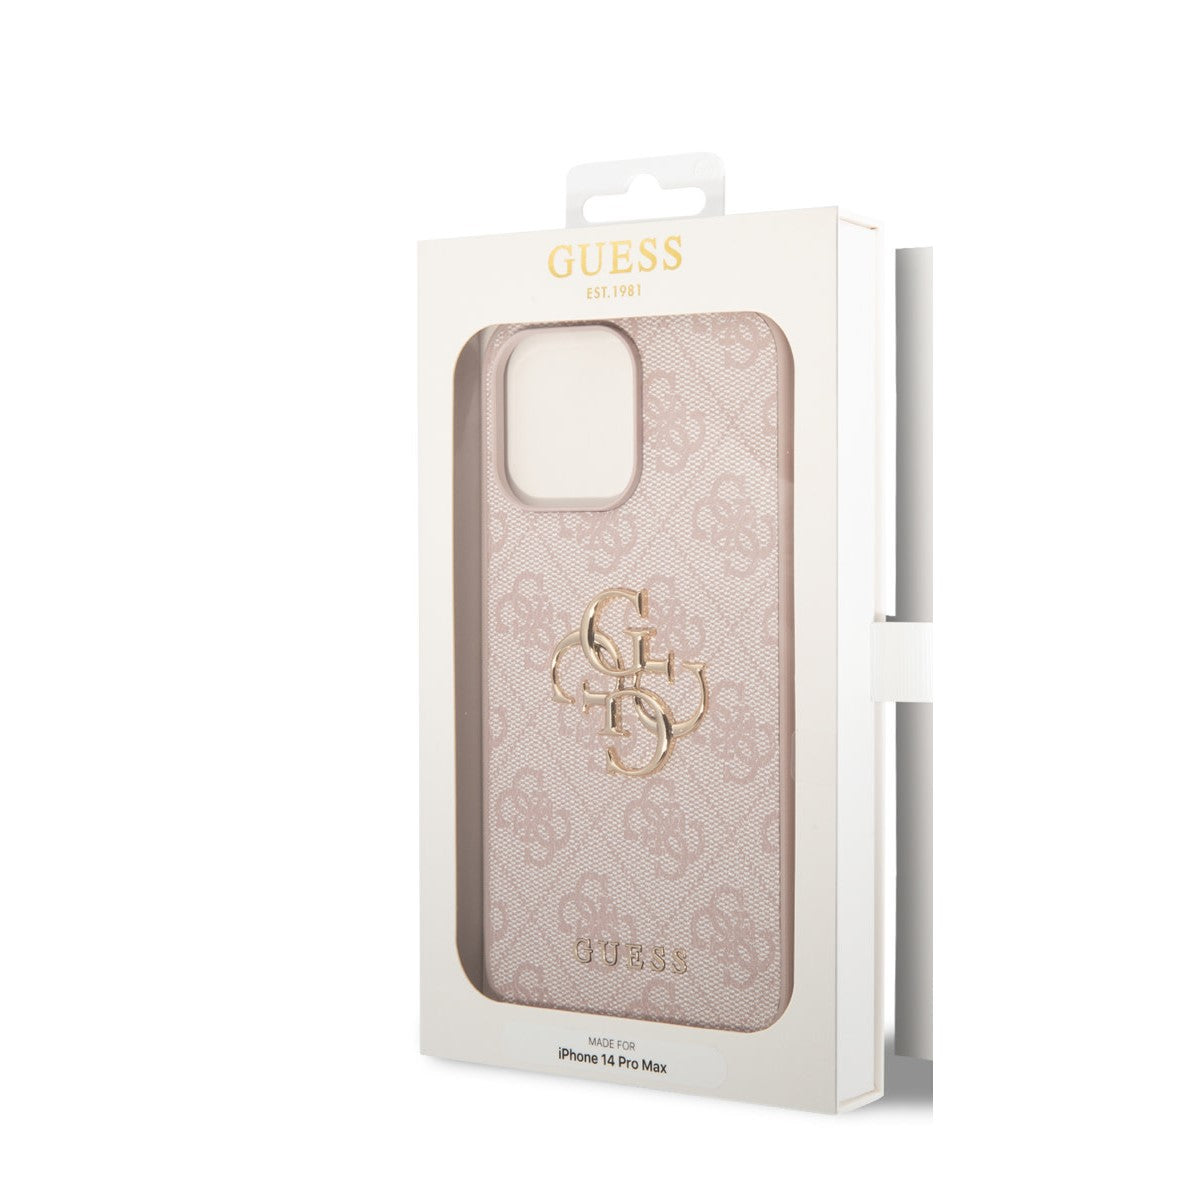 Guess iPhone 14 Pro Max Backcover - Gold 4G Logo - Roze